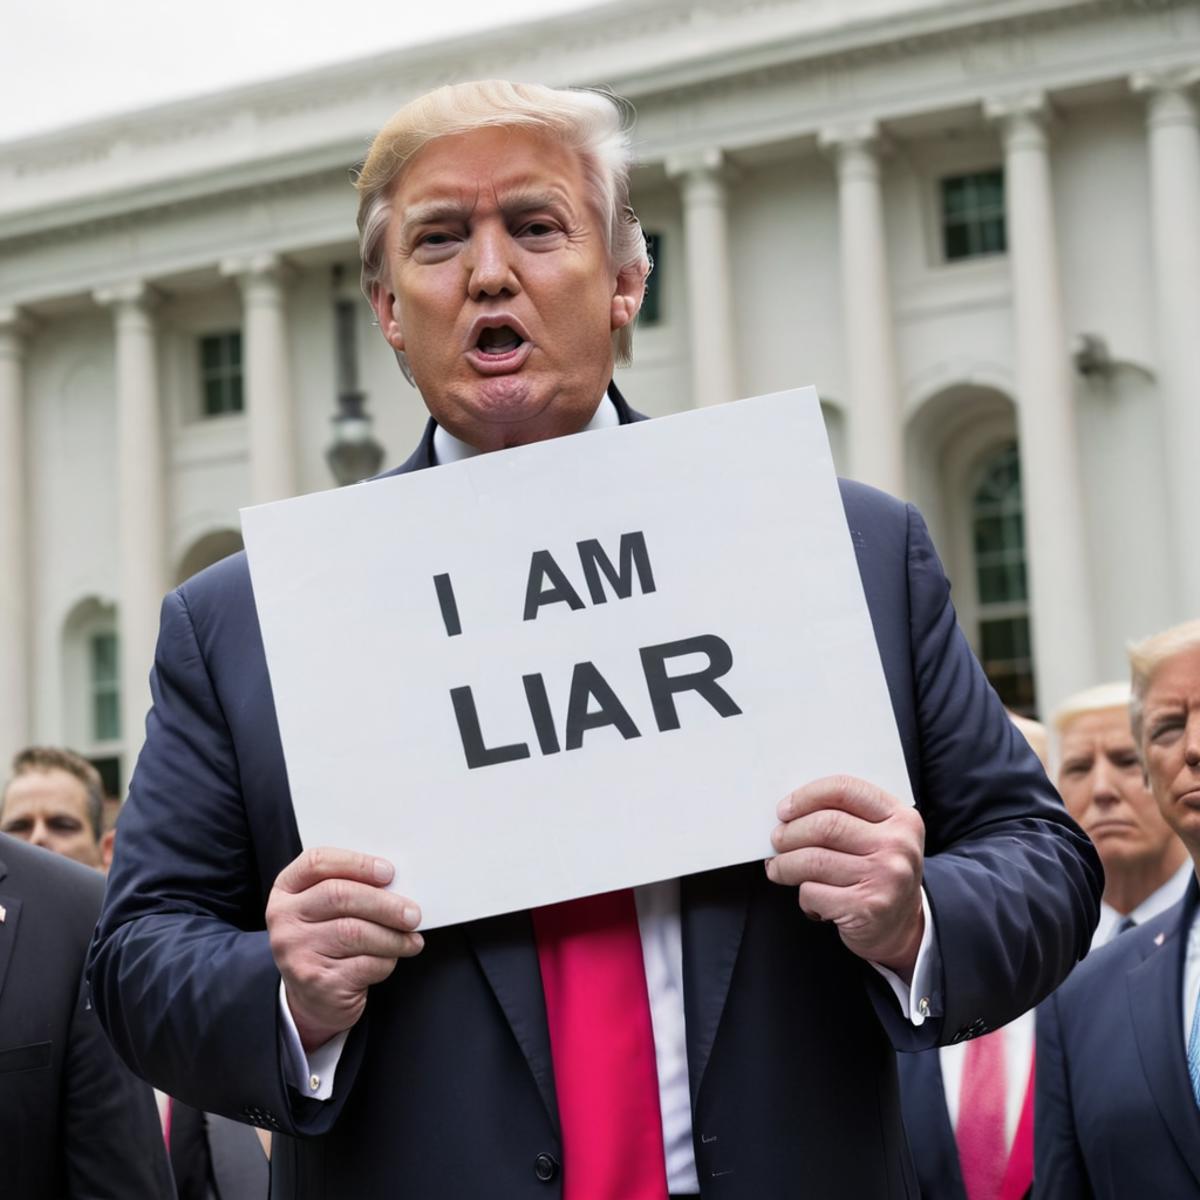 A man holding a sign that says "I am liar" in front of a building.